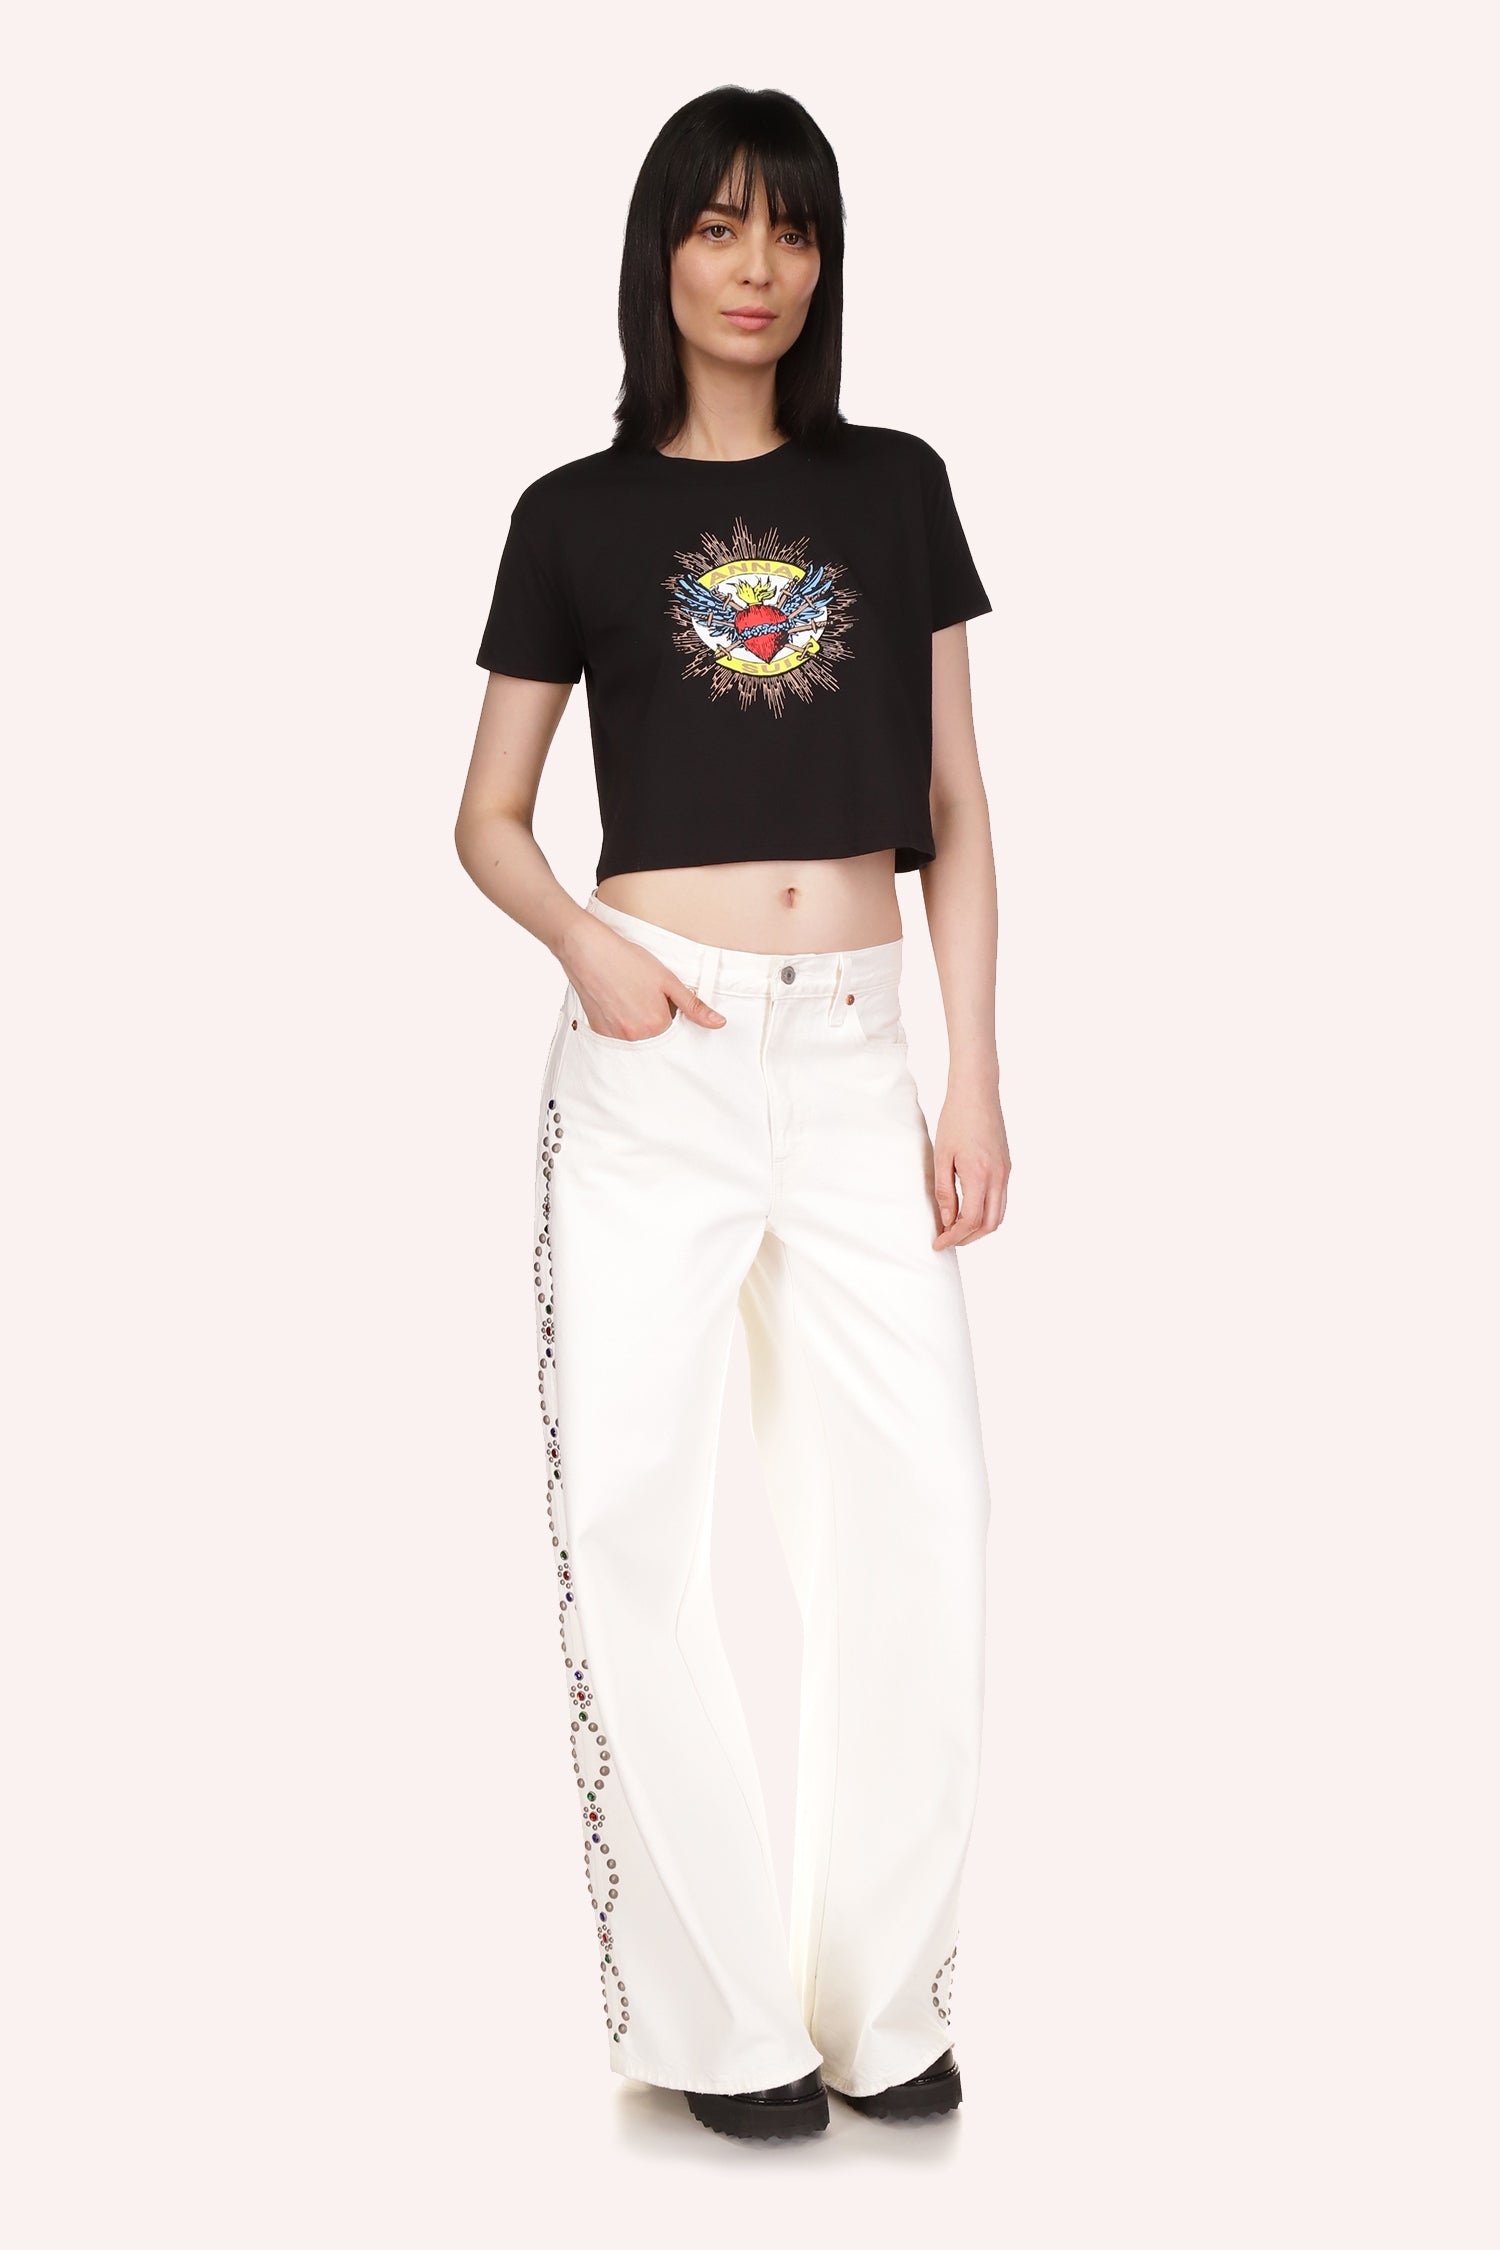 Black background, Sacred Heart in the middle of the tee, Anna Sui name included in the print